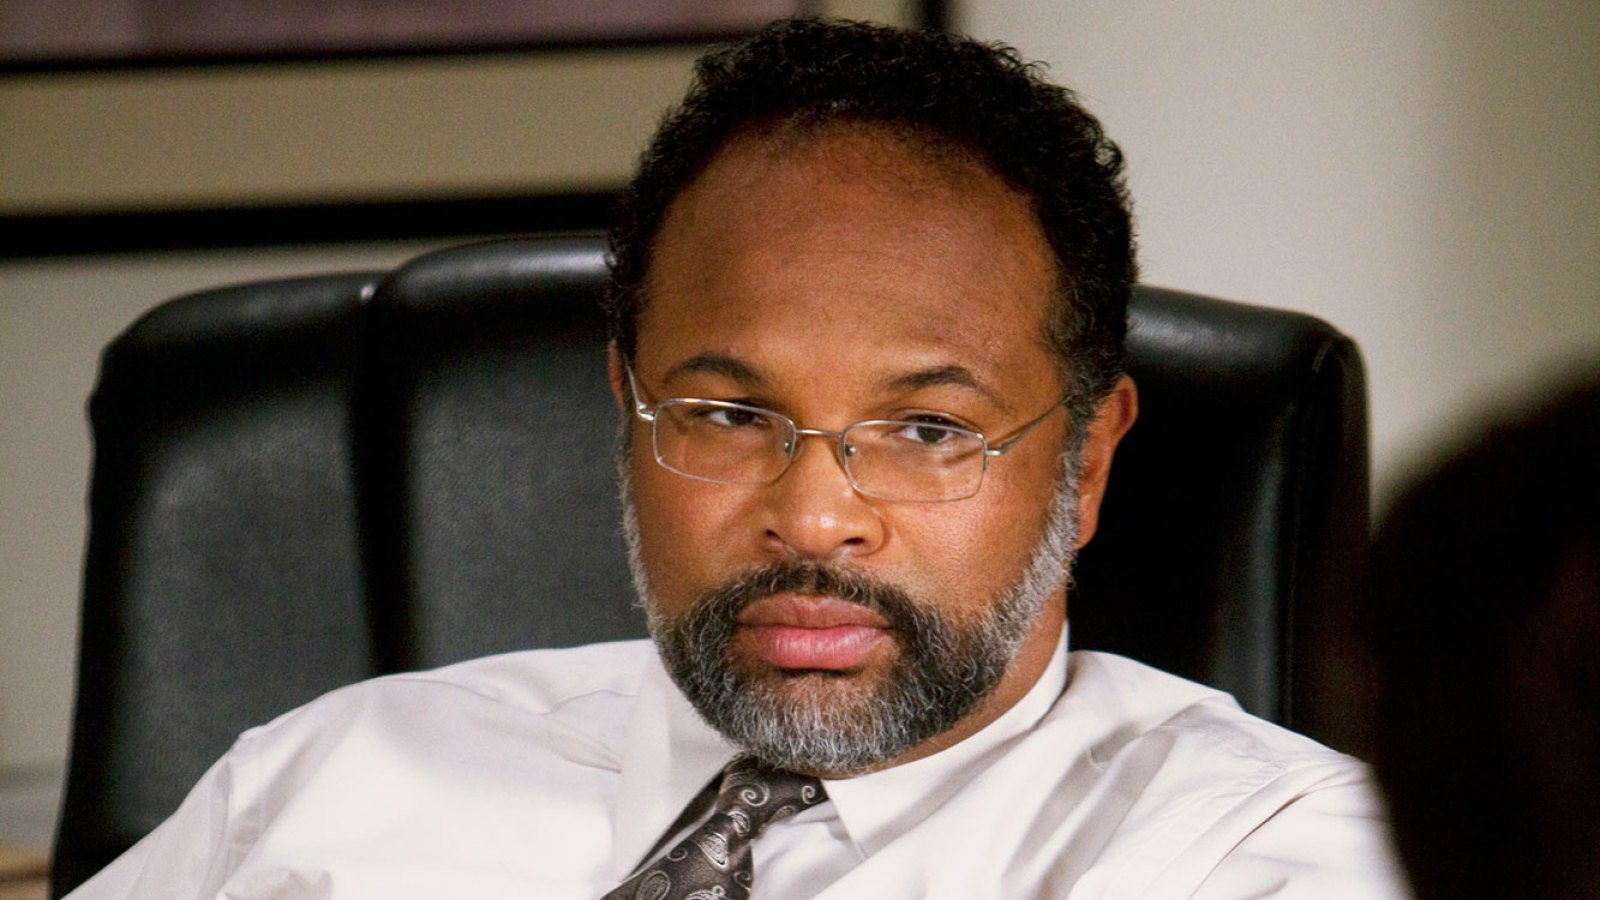 GEOFFREY OWENS on 'THE SECRET LIFE OF THE AMERICAN TEENAGER'